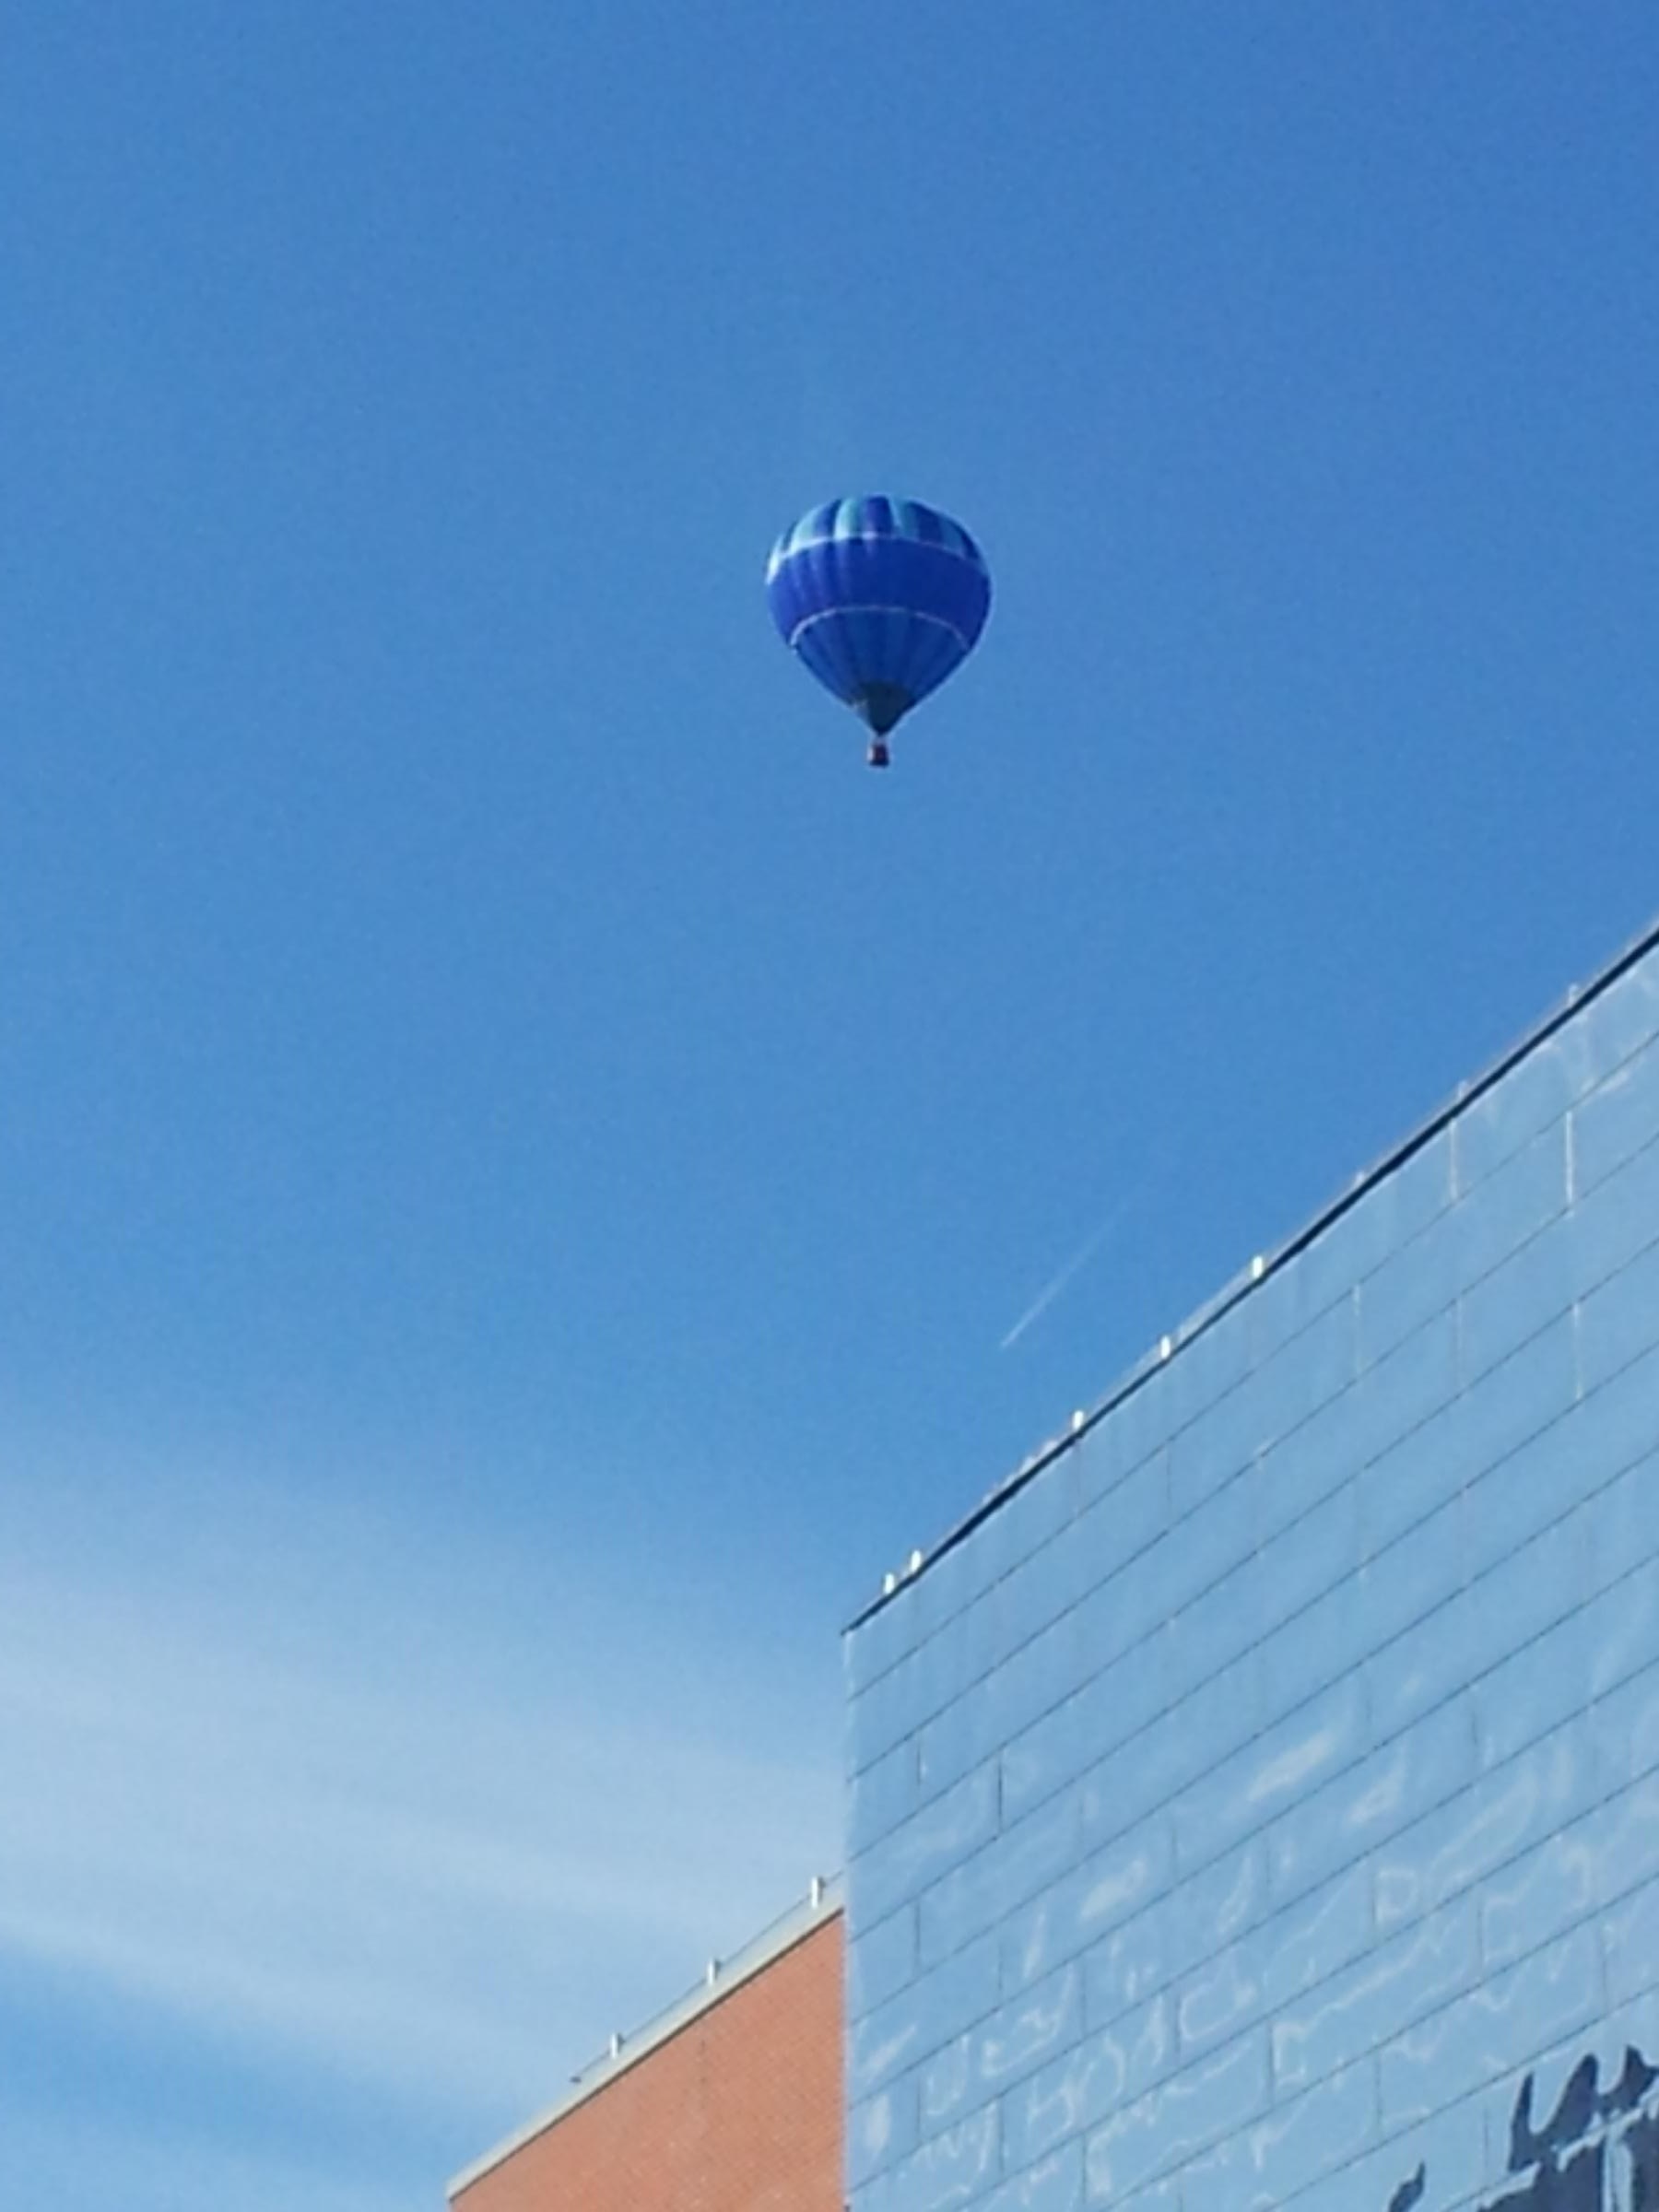 Did you see hot air balloon spotted over Bolton this morning?